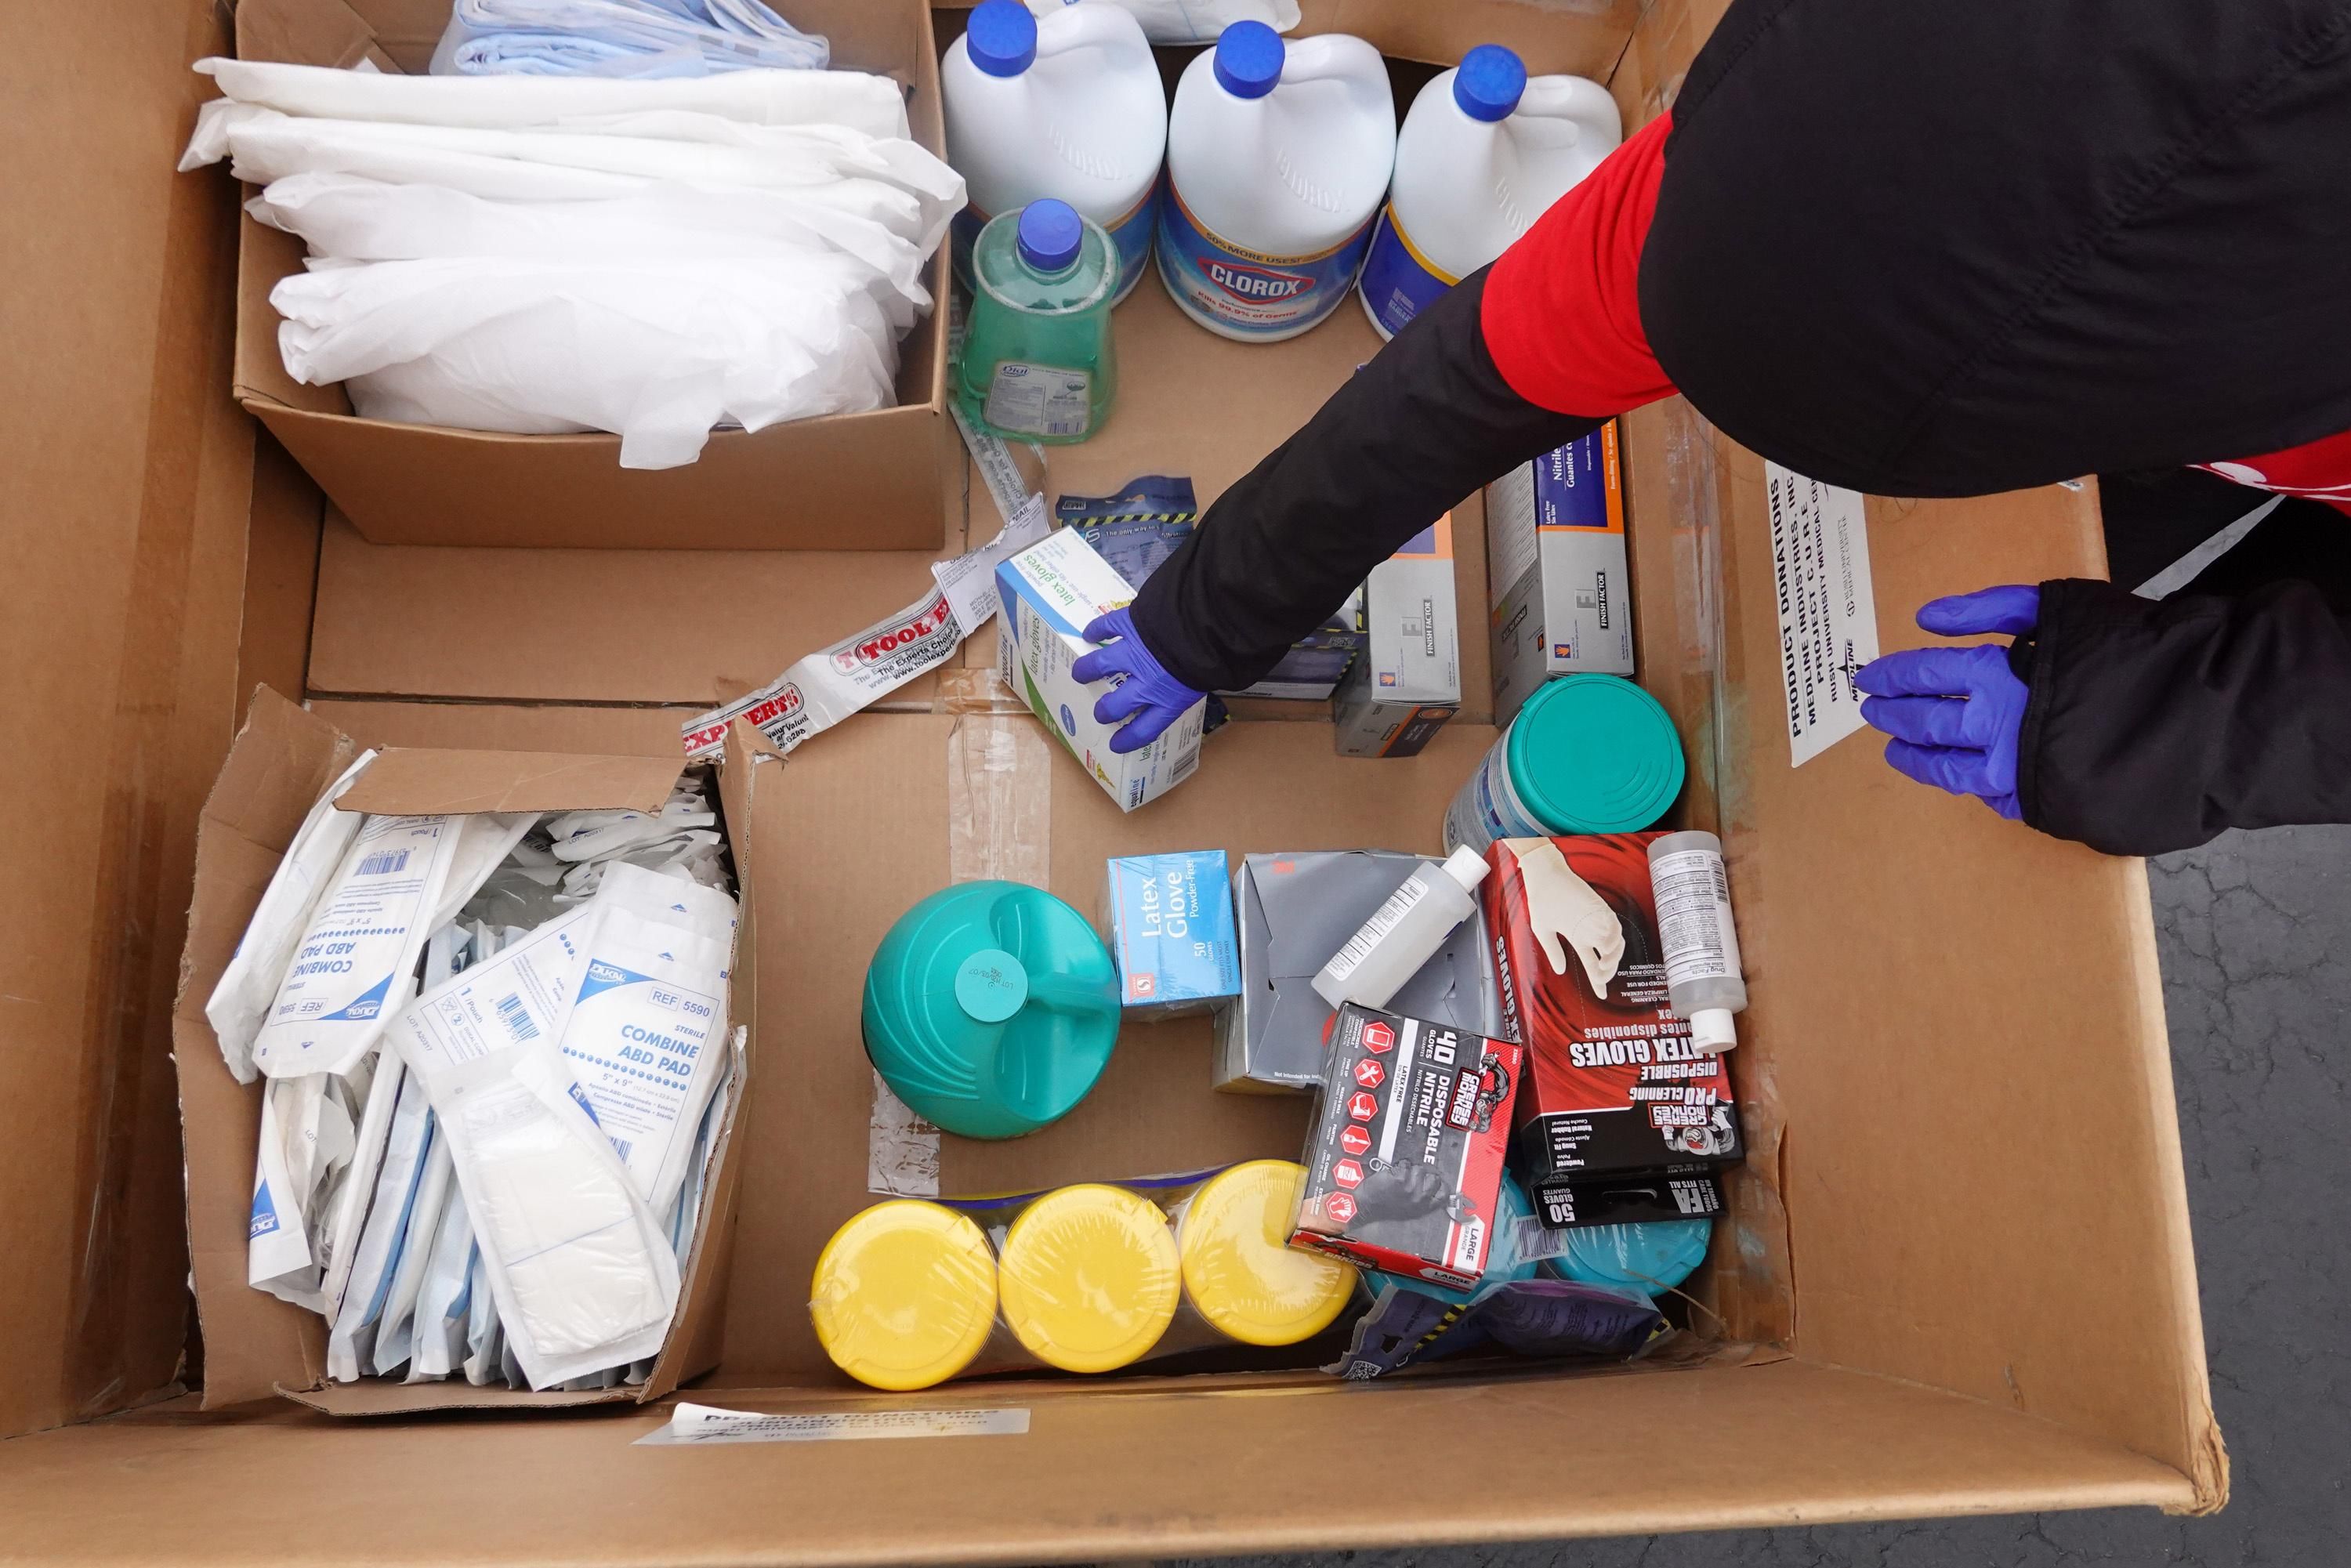 Staff and volunteers with Project C.U.R.E hold a drive outside the United Center to collect donations of personal protective equipment from the community which will be used to supply hospitals and clinics that are experiencing shortages due to the Covid-19 pandemic on March 29, 2020 in Chicago. (Photo: Scott Olson via Getty Images)